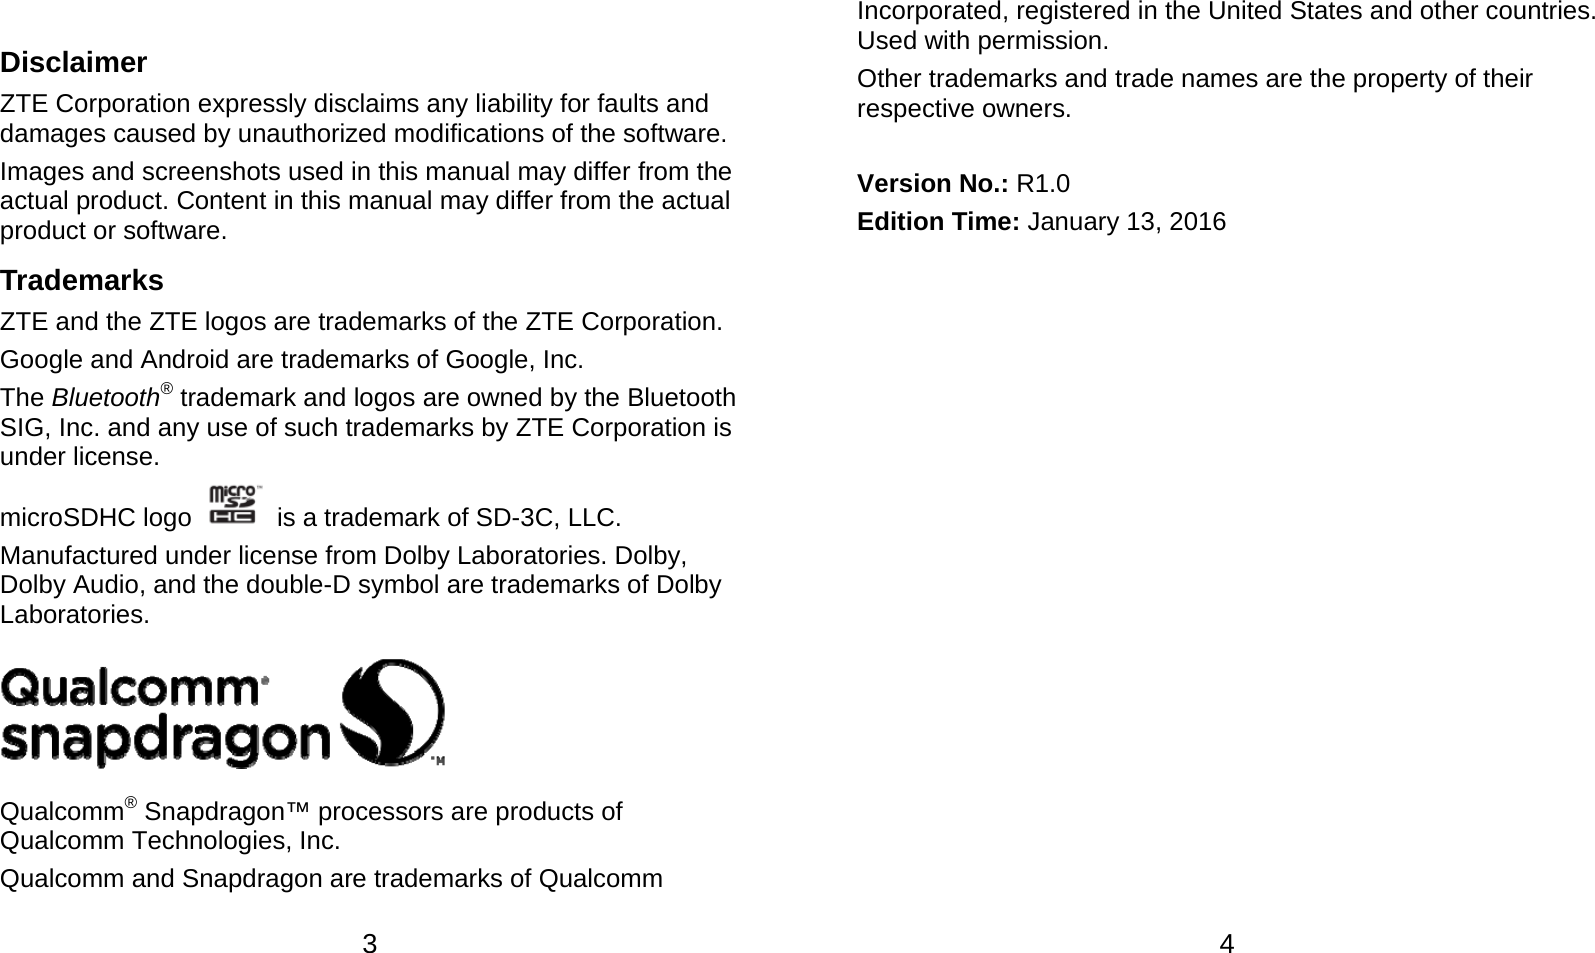  3  Disclaimer ZTE Corporation expressly disclaims any liability for faults and damages caused by unauthorized modifications of the software. Images and screenshots used in this manual may differ from the actual product. Content in this manual may differ from the actual product or software. Trademarks ZTE and the ZTE logos are trademarks of the ZTE Corporation. Google and Android are trademarks of Google, Inc. The Bluetooth® trademark and logos are owned by the Bluetooth SIG, Inc. and any use of such trademarks by ZTE Corporation is under license. microSDHC logo    is a trademark of SD-3C, LLC.   Manufactured under license from Dolby Laboratories. Dolby, Dolby Audio, and the double-D symbol are trademarks of Dolby Laboratories.  Qualcomm® Snapdragon™ processors are products of Qualcomm Technologies, Inc.   Qualcomm and Snapdragon are trademarks of Qualcomm  4 Incorporated, registered in the United States and other countries. Used with permission. Other trademarks and trade names are the property of their respective owners.  Version No.: R1.0 Edition Time: January 13, 2016  